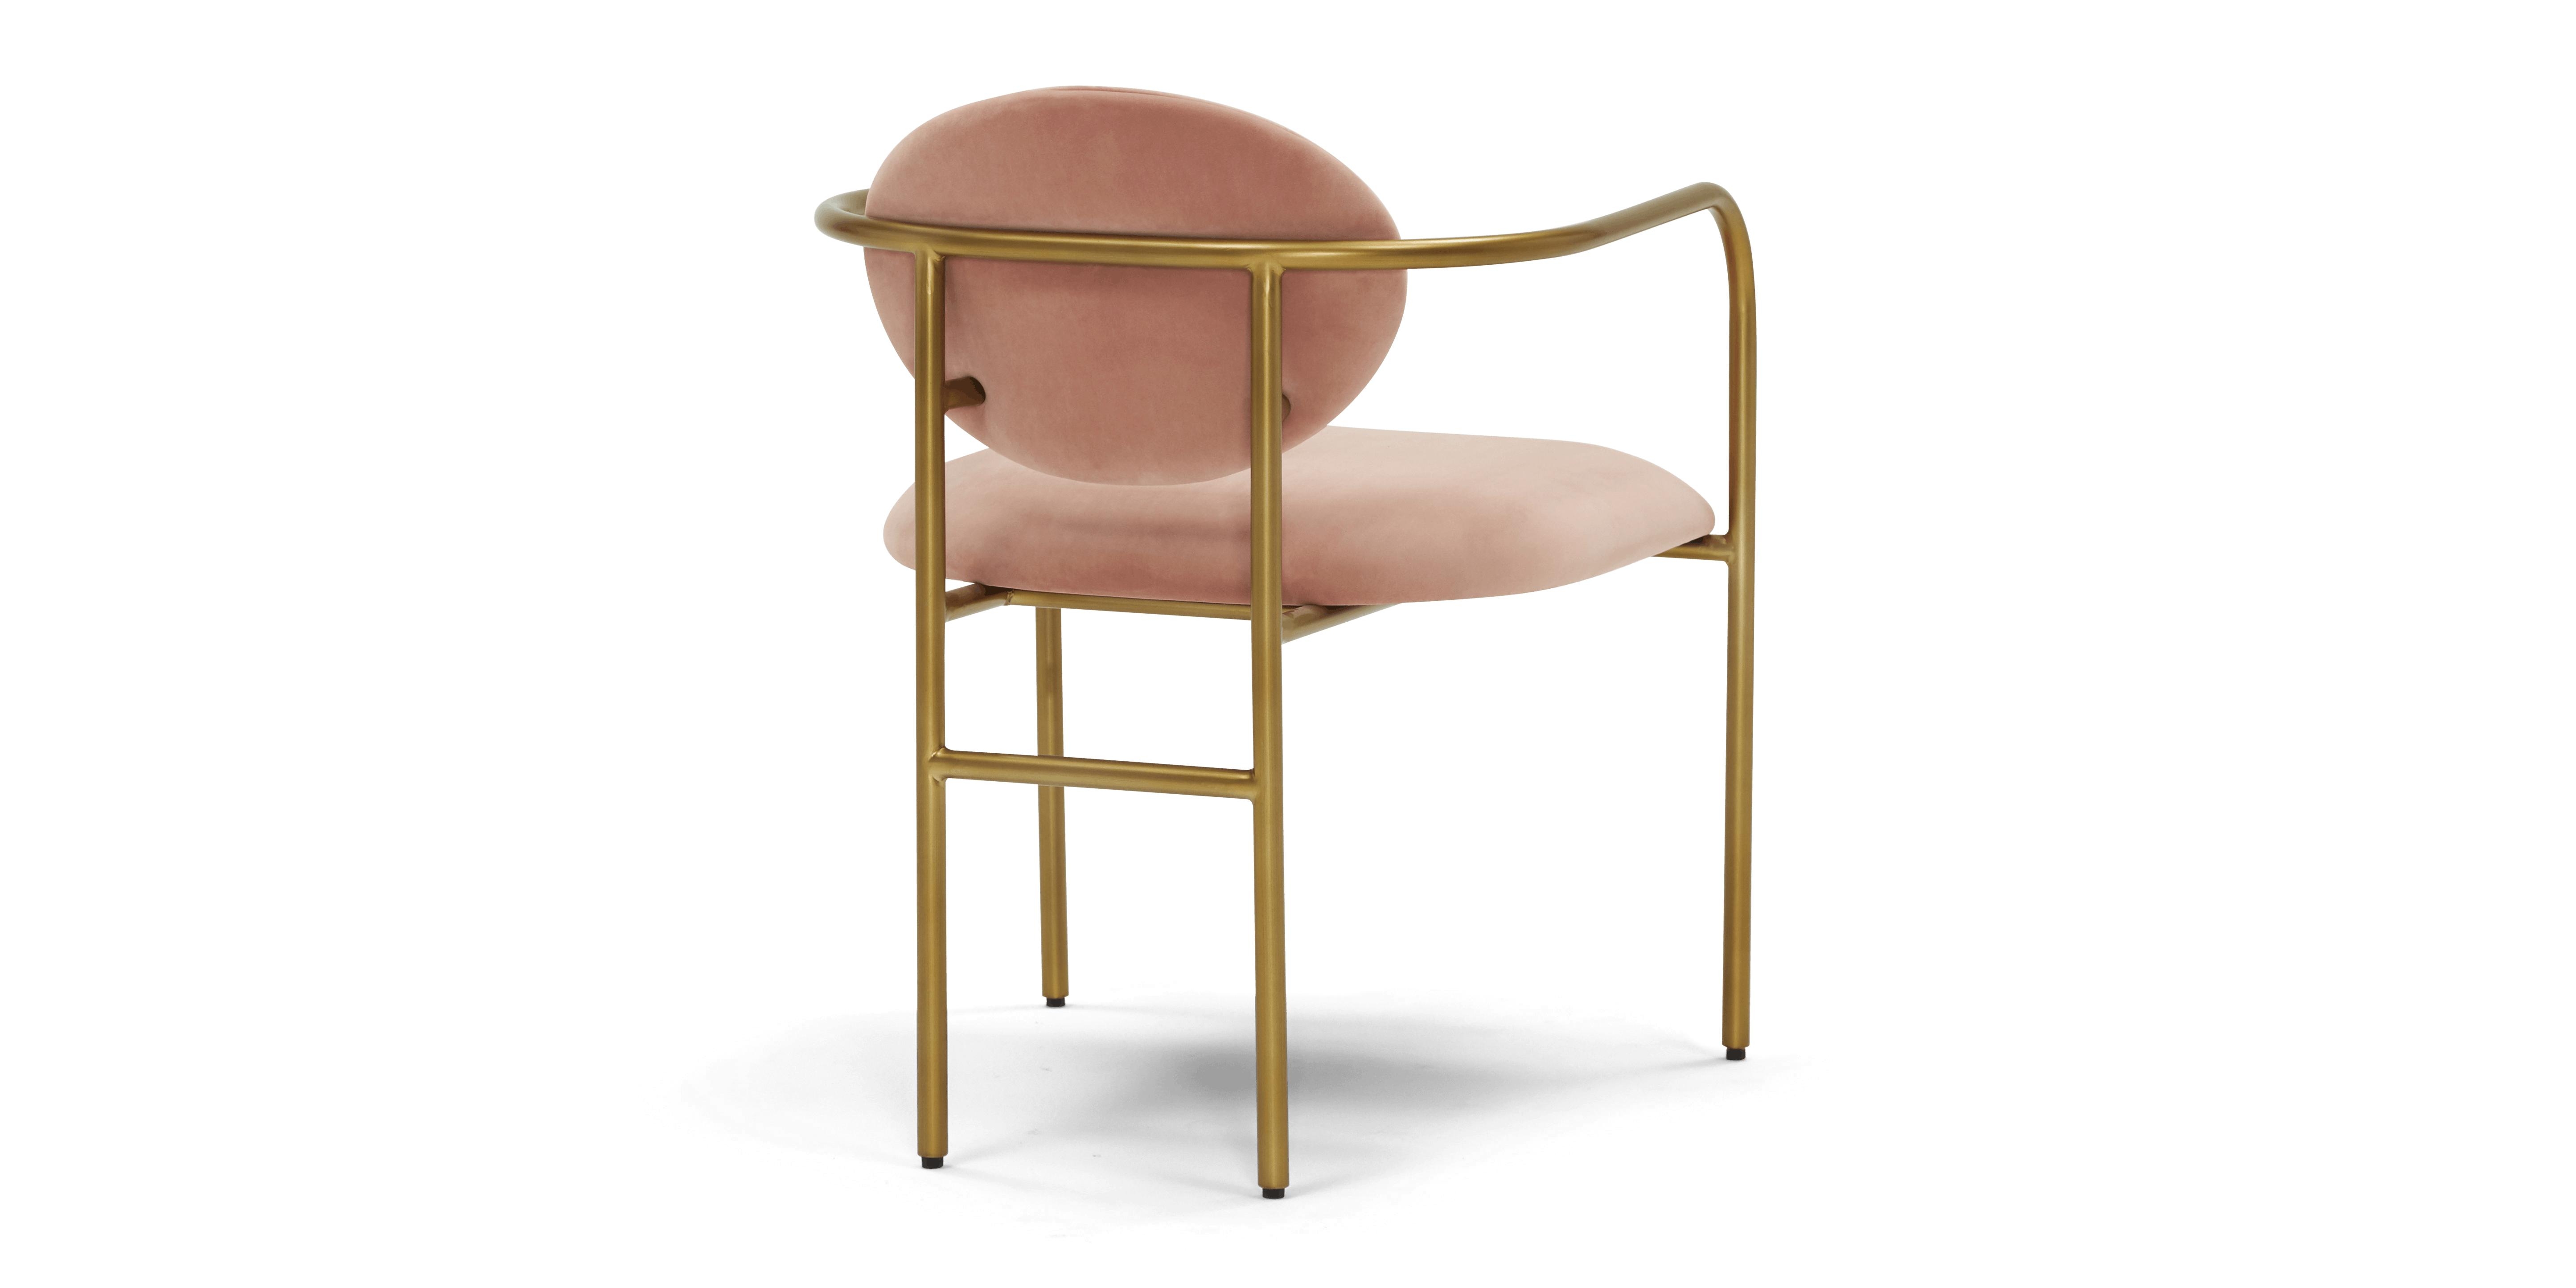 Pink Soleil Mid Century Modern Dining Chair - Royale Blush - Image 3